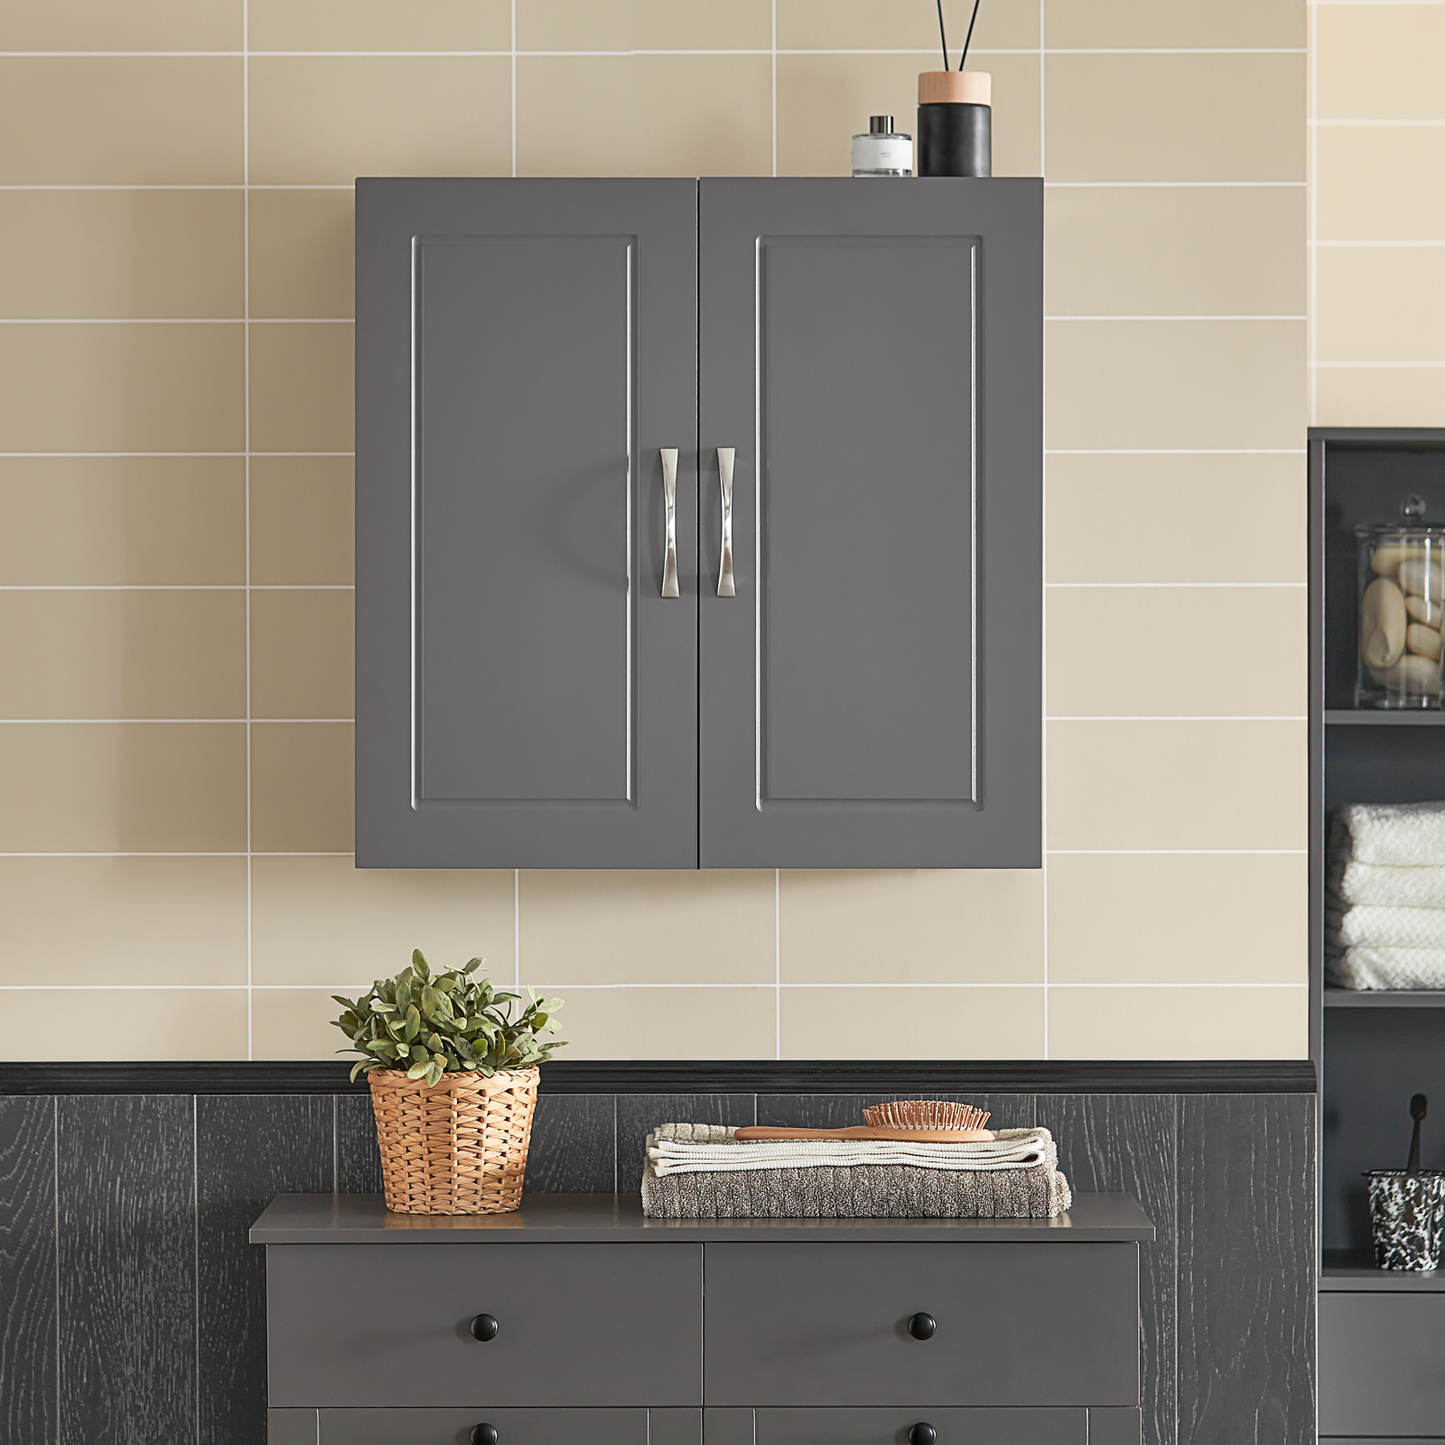 SoBuy Wall Storage Cabinet Unit with Double Doors,Kitchen Bathroom Wall Cabinet,Garage or Laundry Room Grey